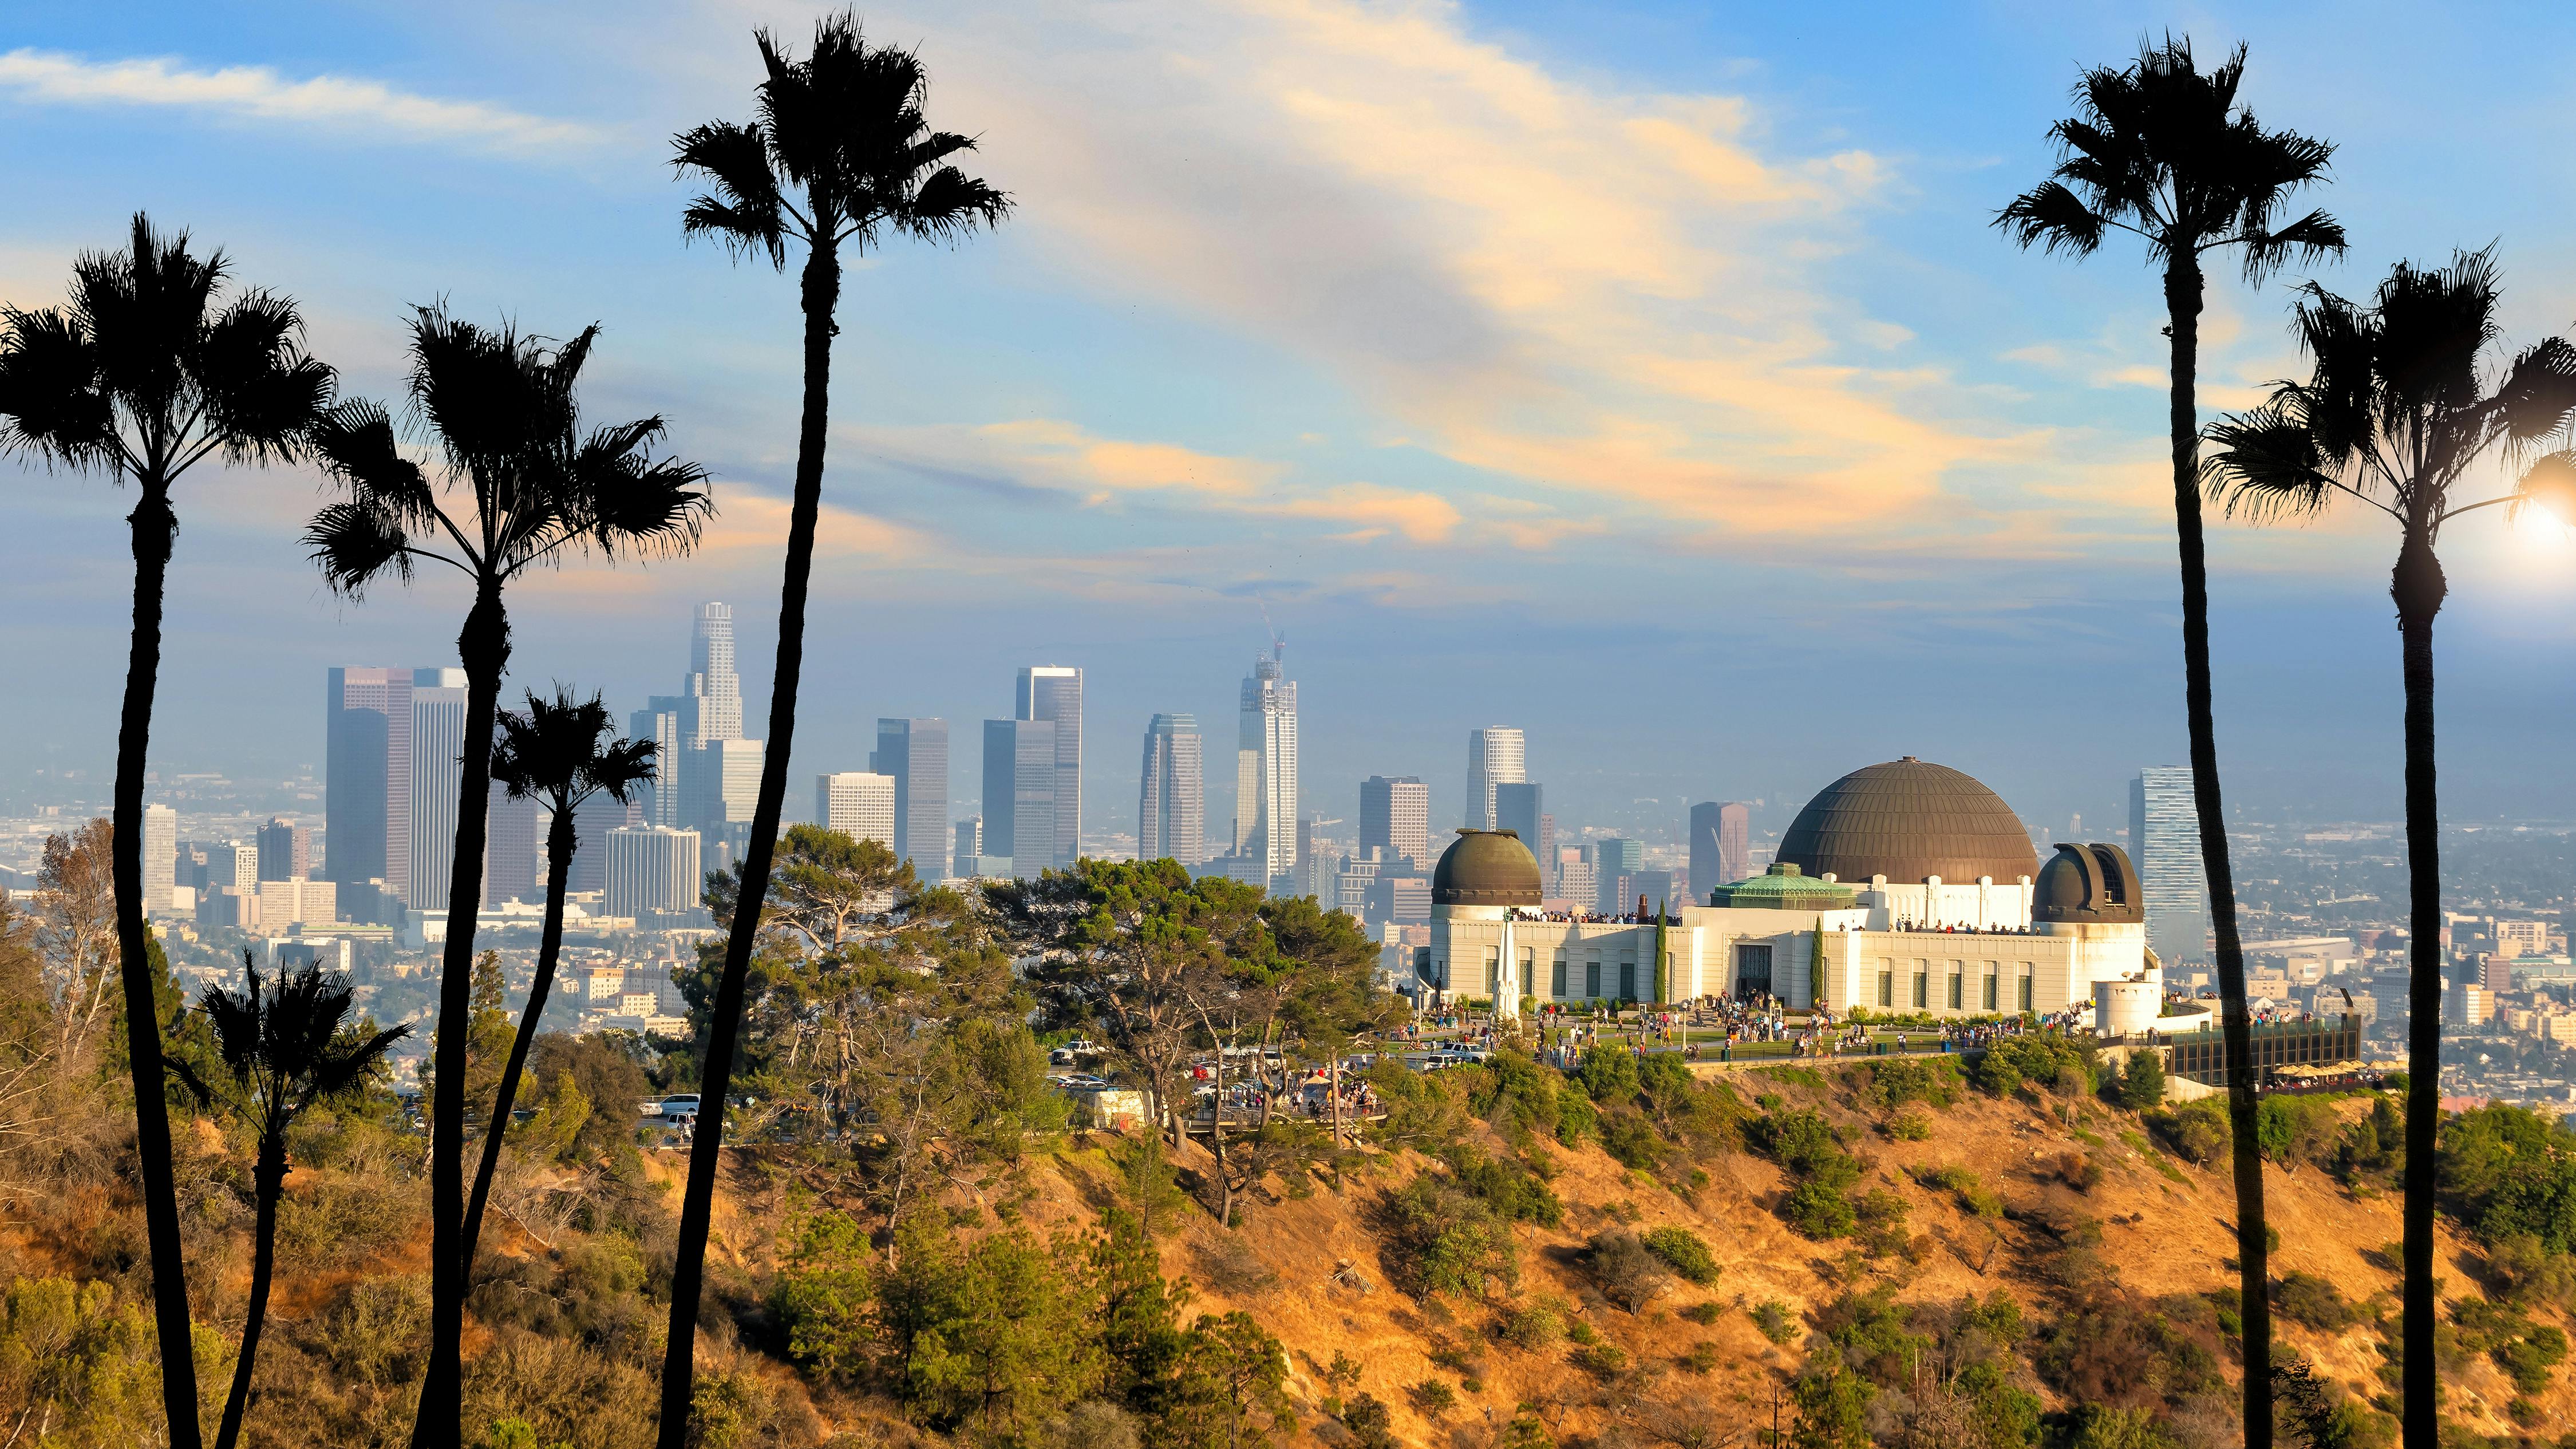 Griffith Park, Griffith Observatory overlooking Los Angeles, things to do in LA